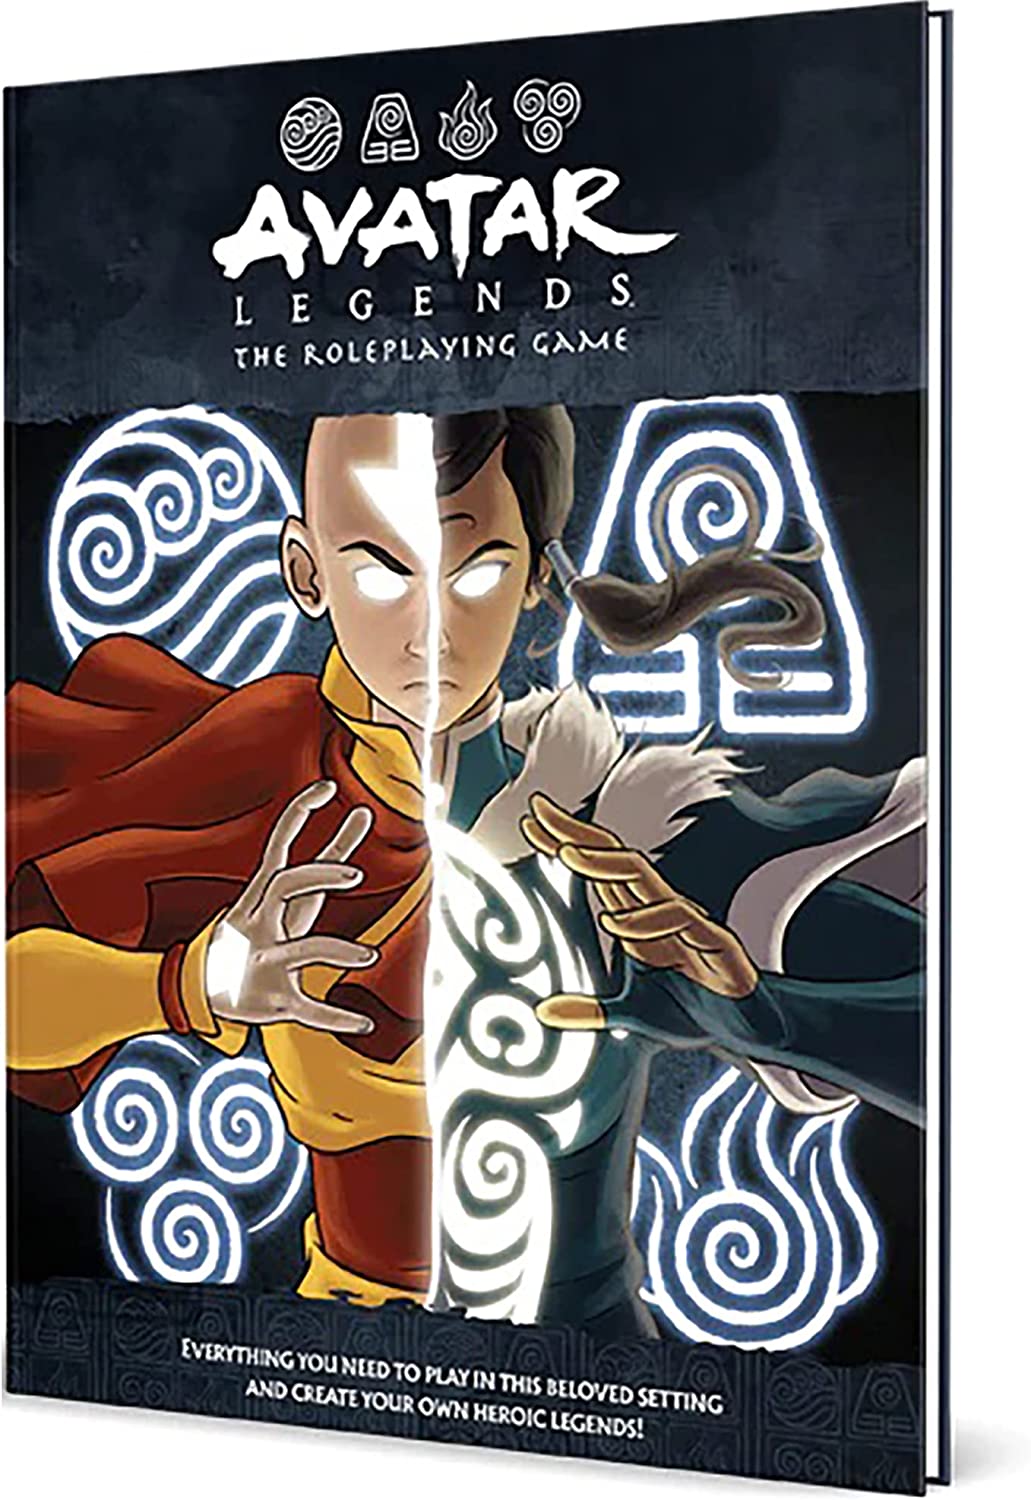 Avatar Legends The Roleplaying Game: Core Book | CCGPrime